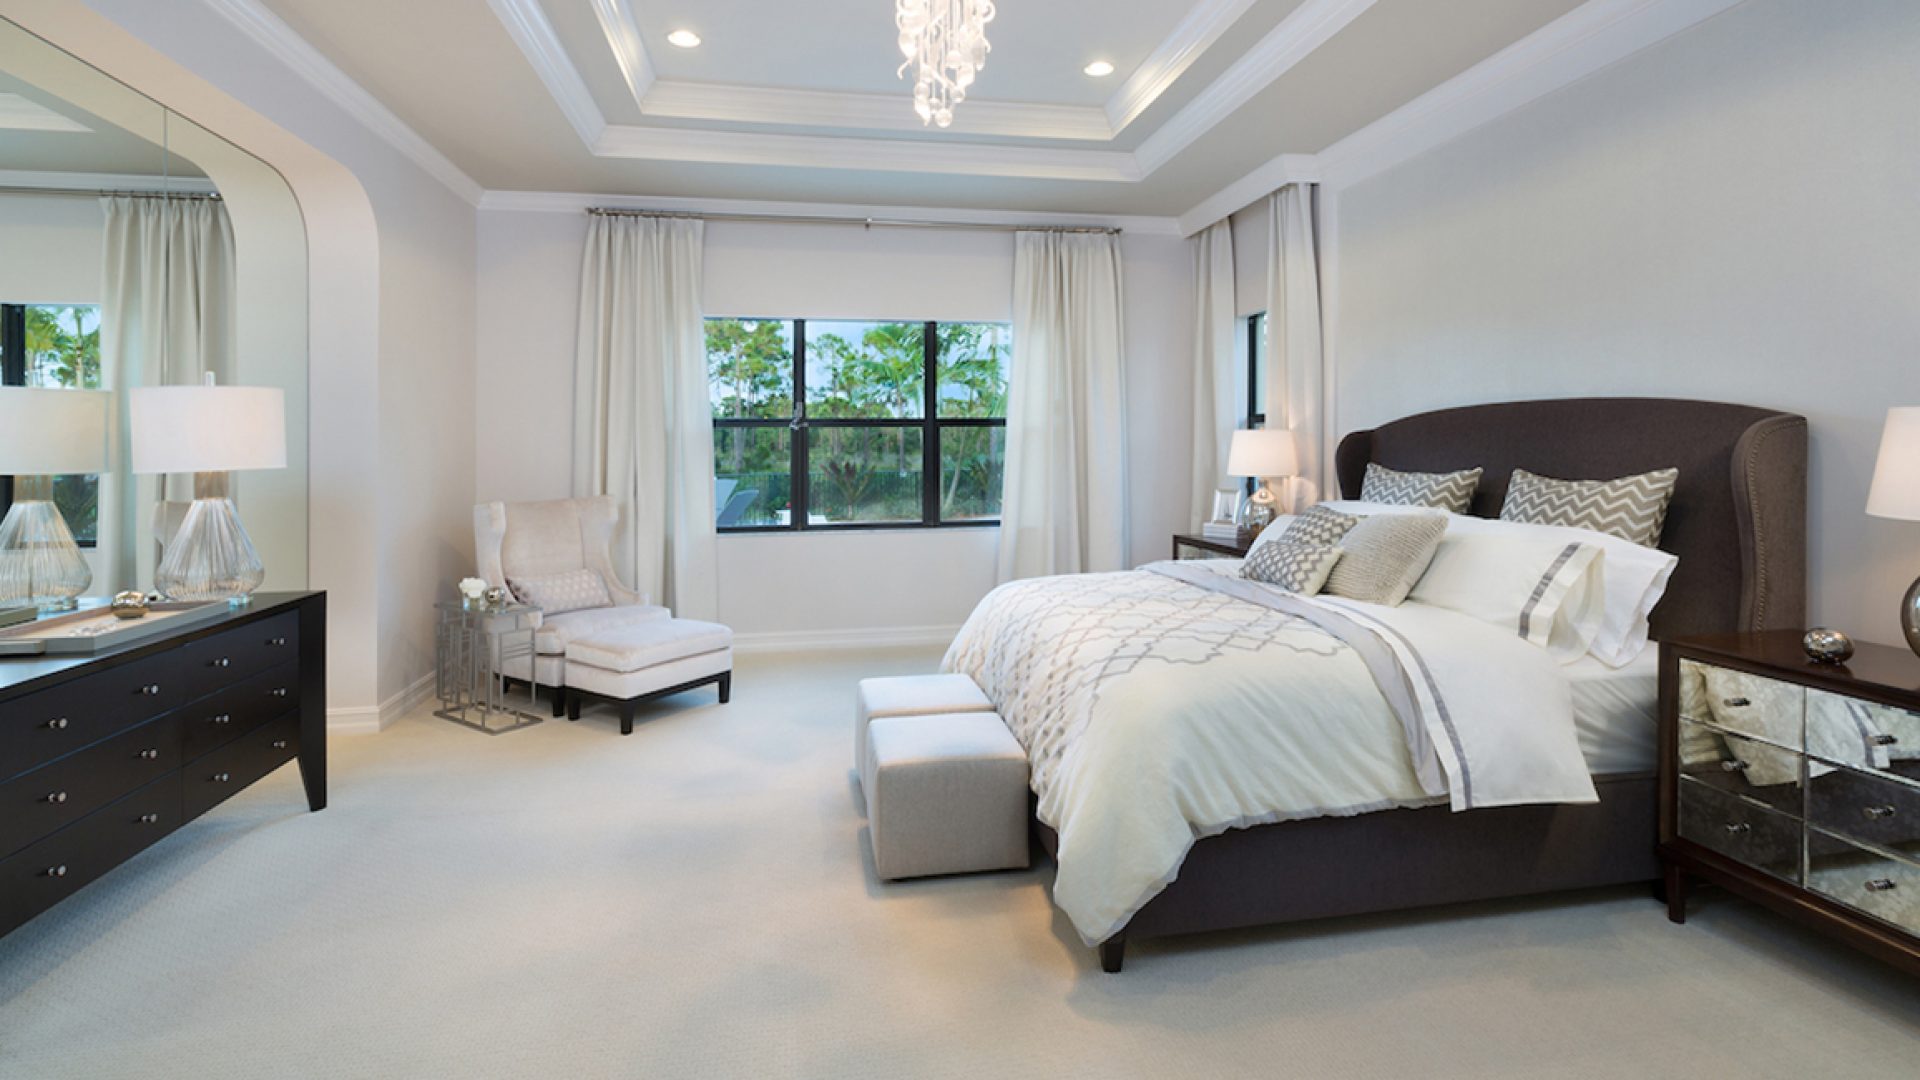 5 Design Ideas for Your Bedroom